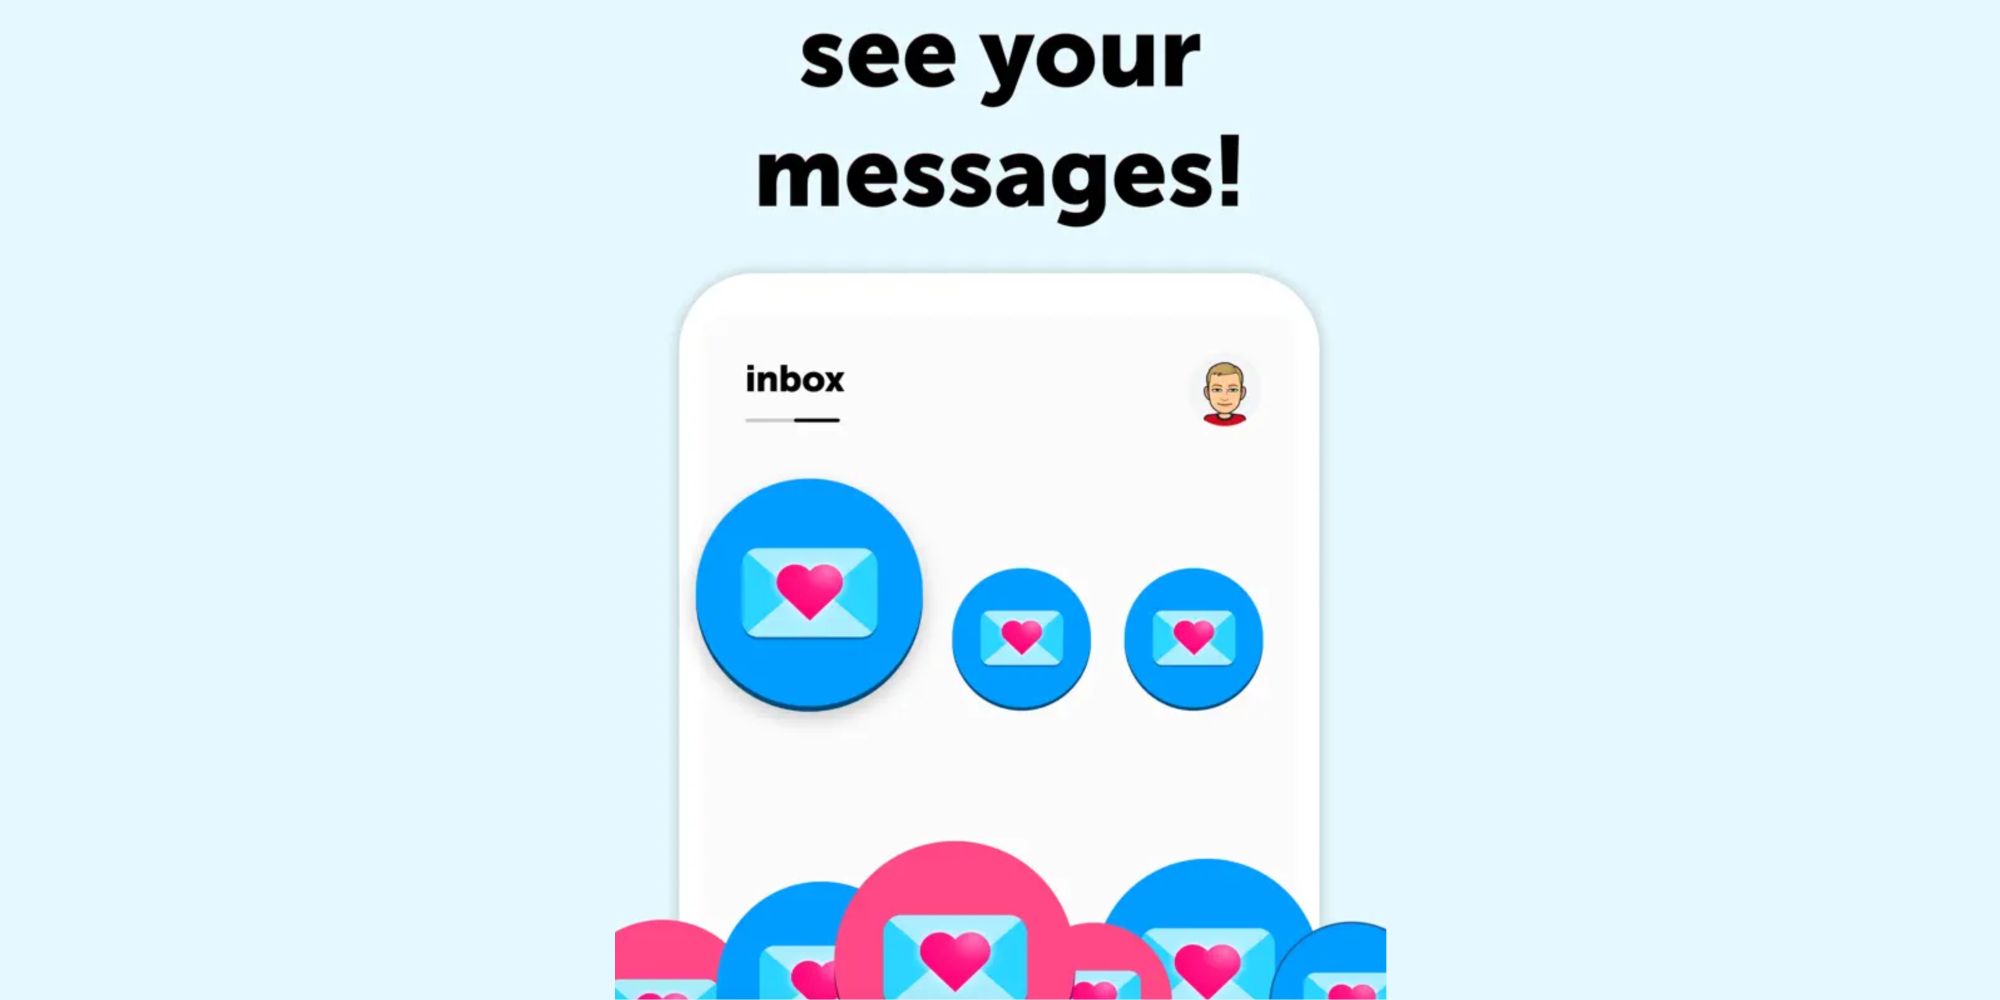 The Sendit logo of an envelope with a heart icon is pictured in pink and blue on a blank Snapchat screen